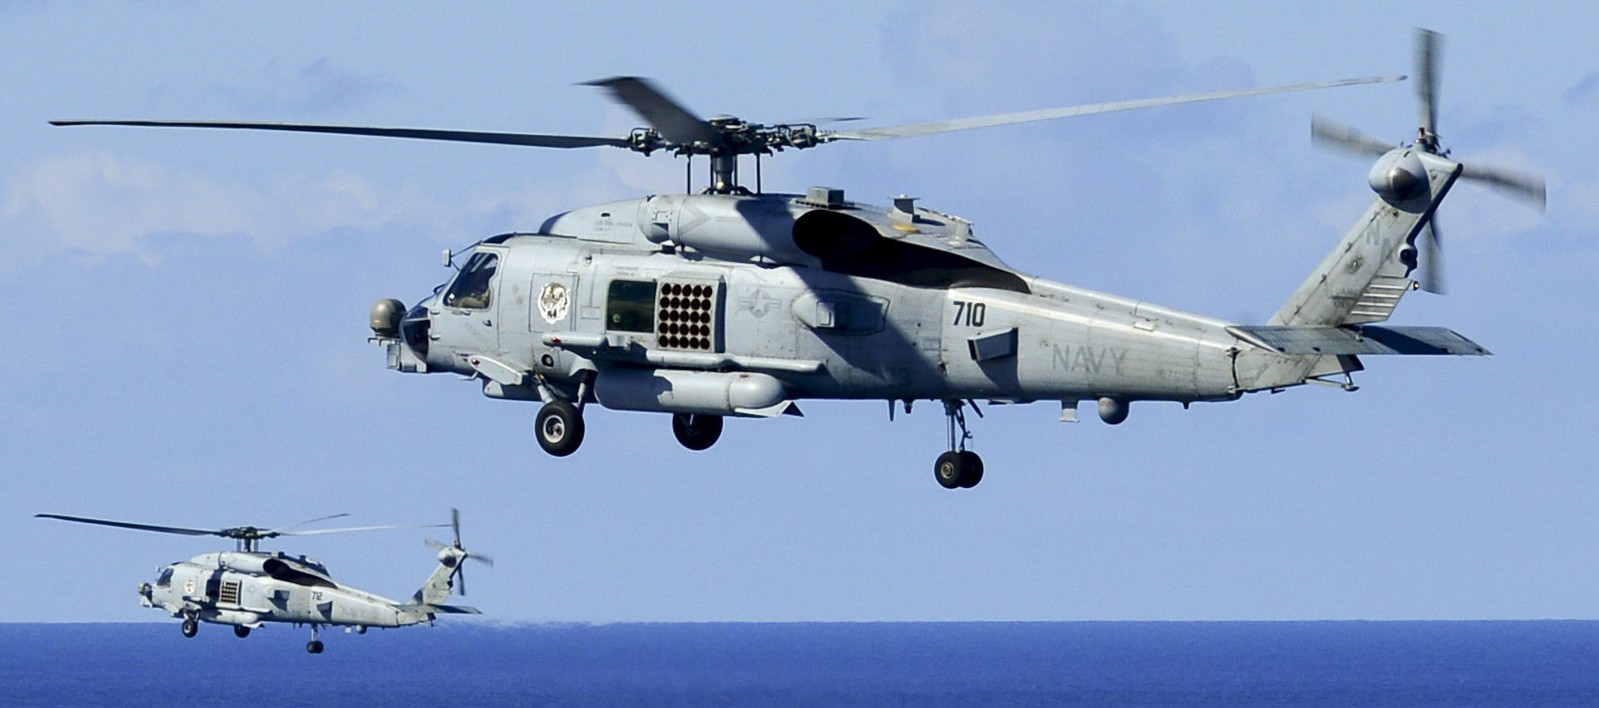 hsm-73 battlecats helicopter maritime strike squadron us navy mh-60r seahawk 2015 65